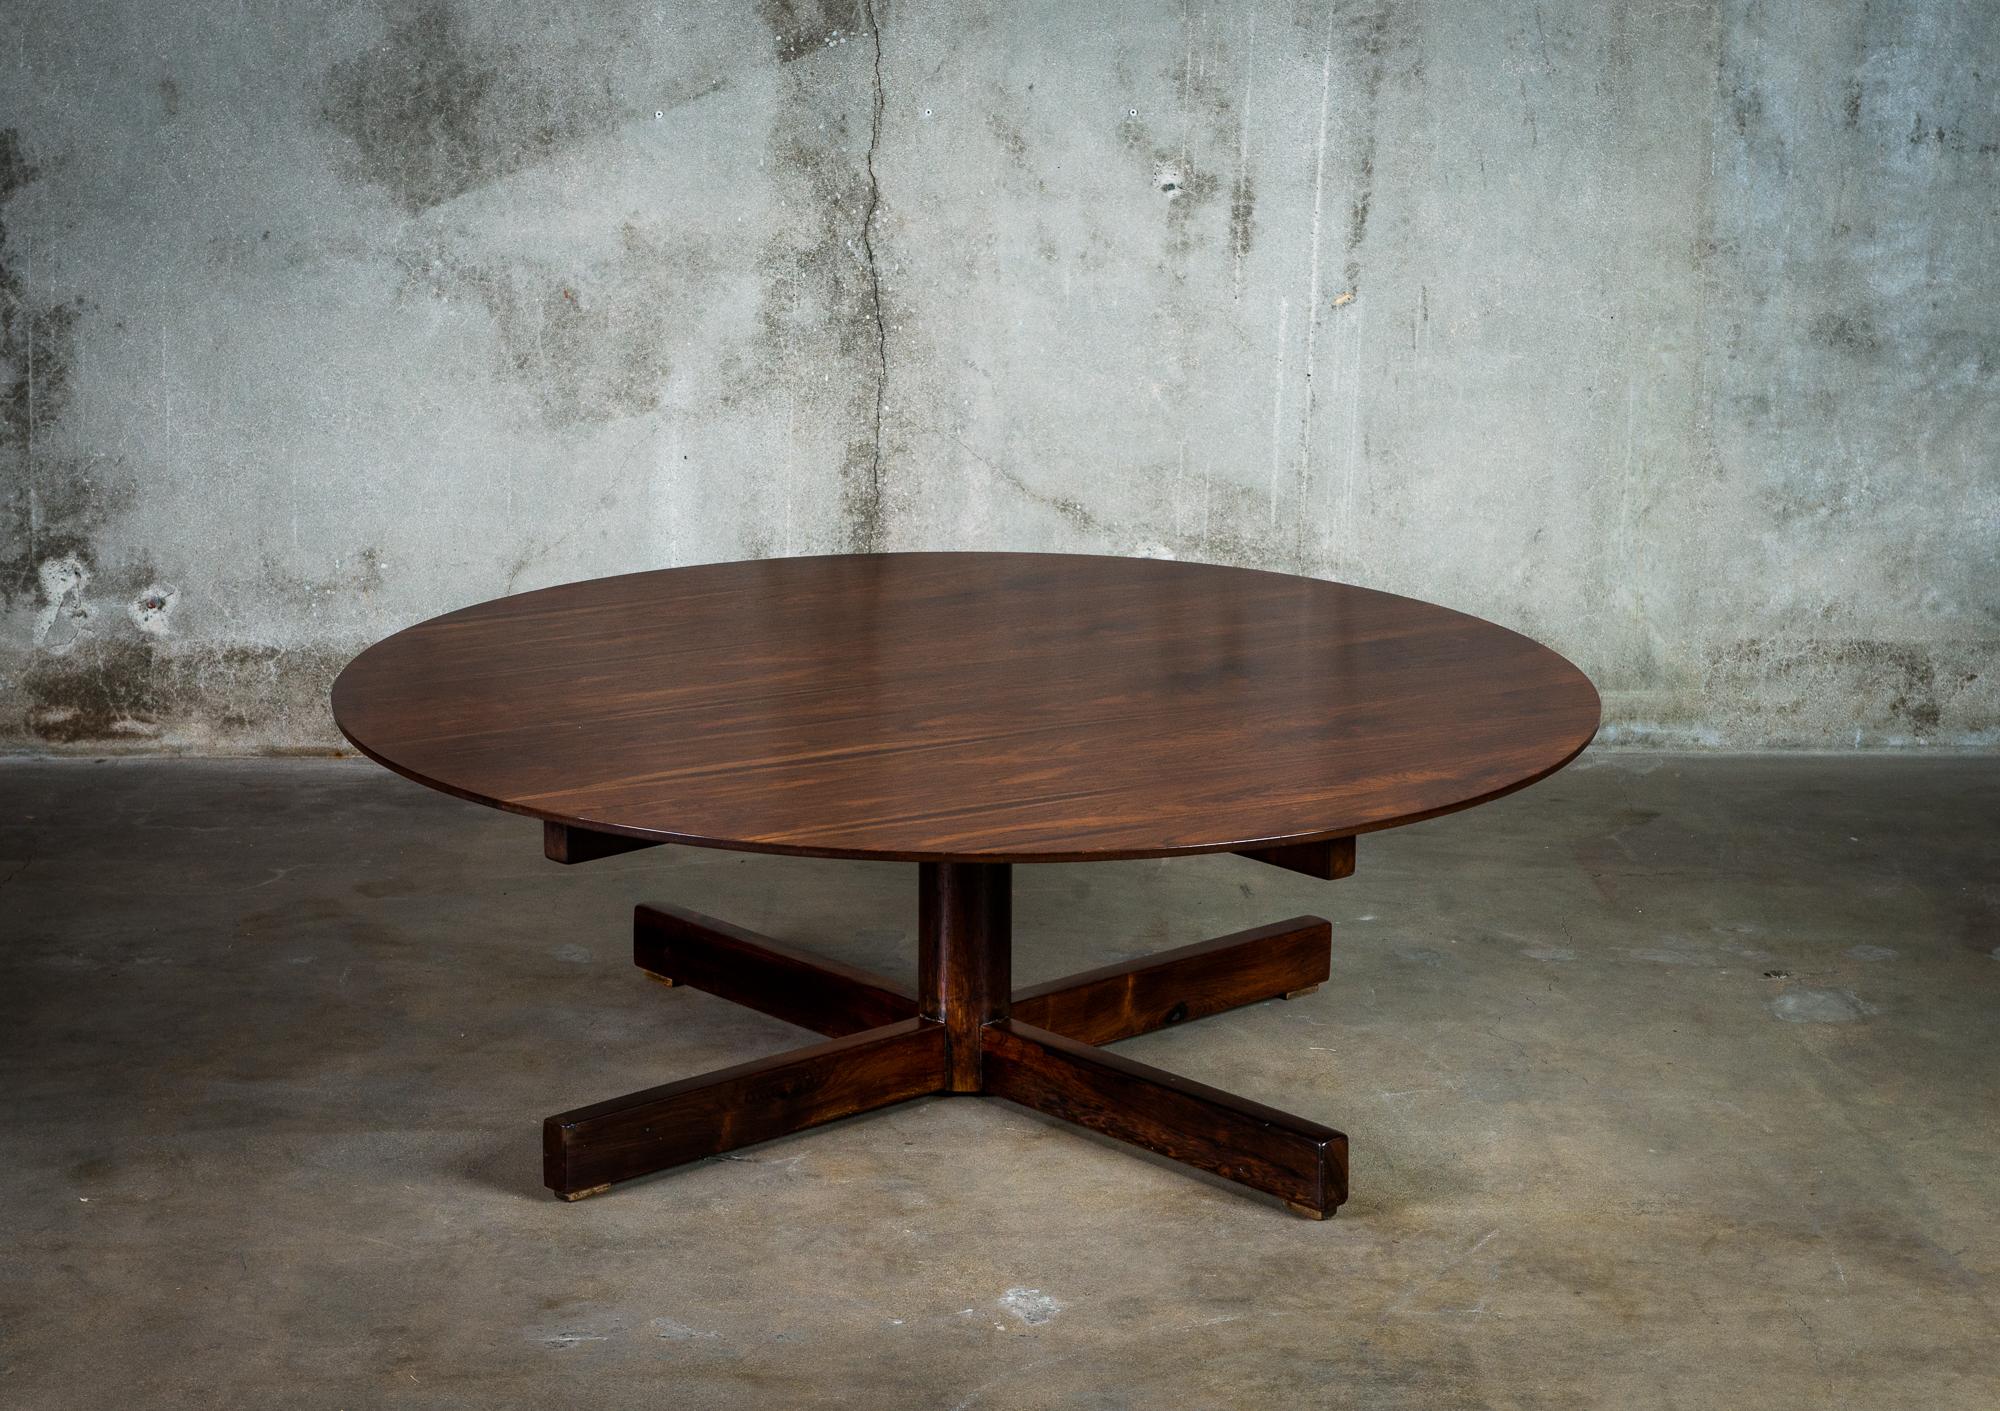 A rosewood coffee table by Jorge Zalszupin, 1960s.